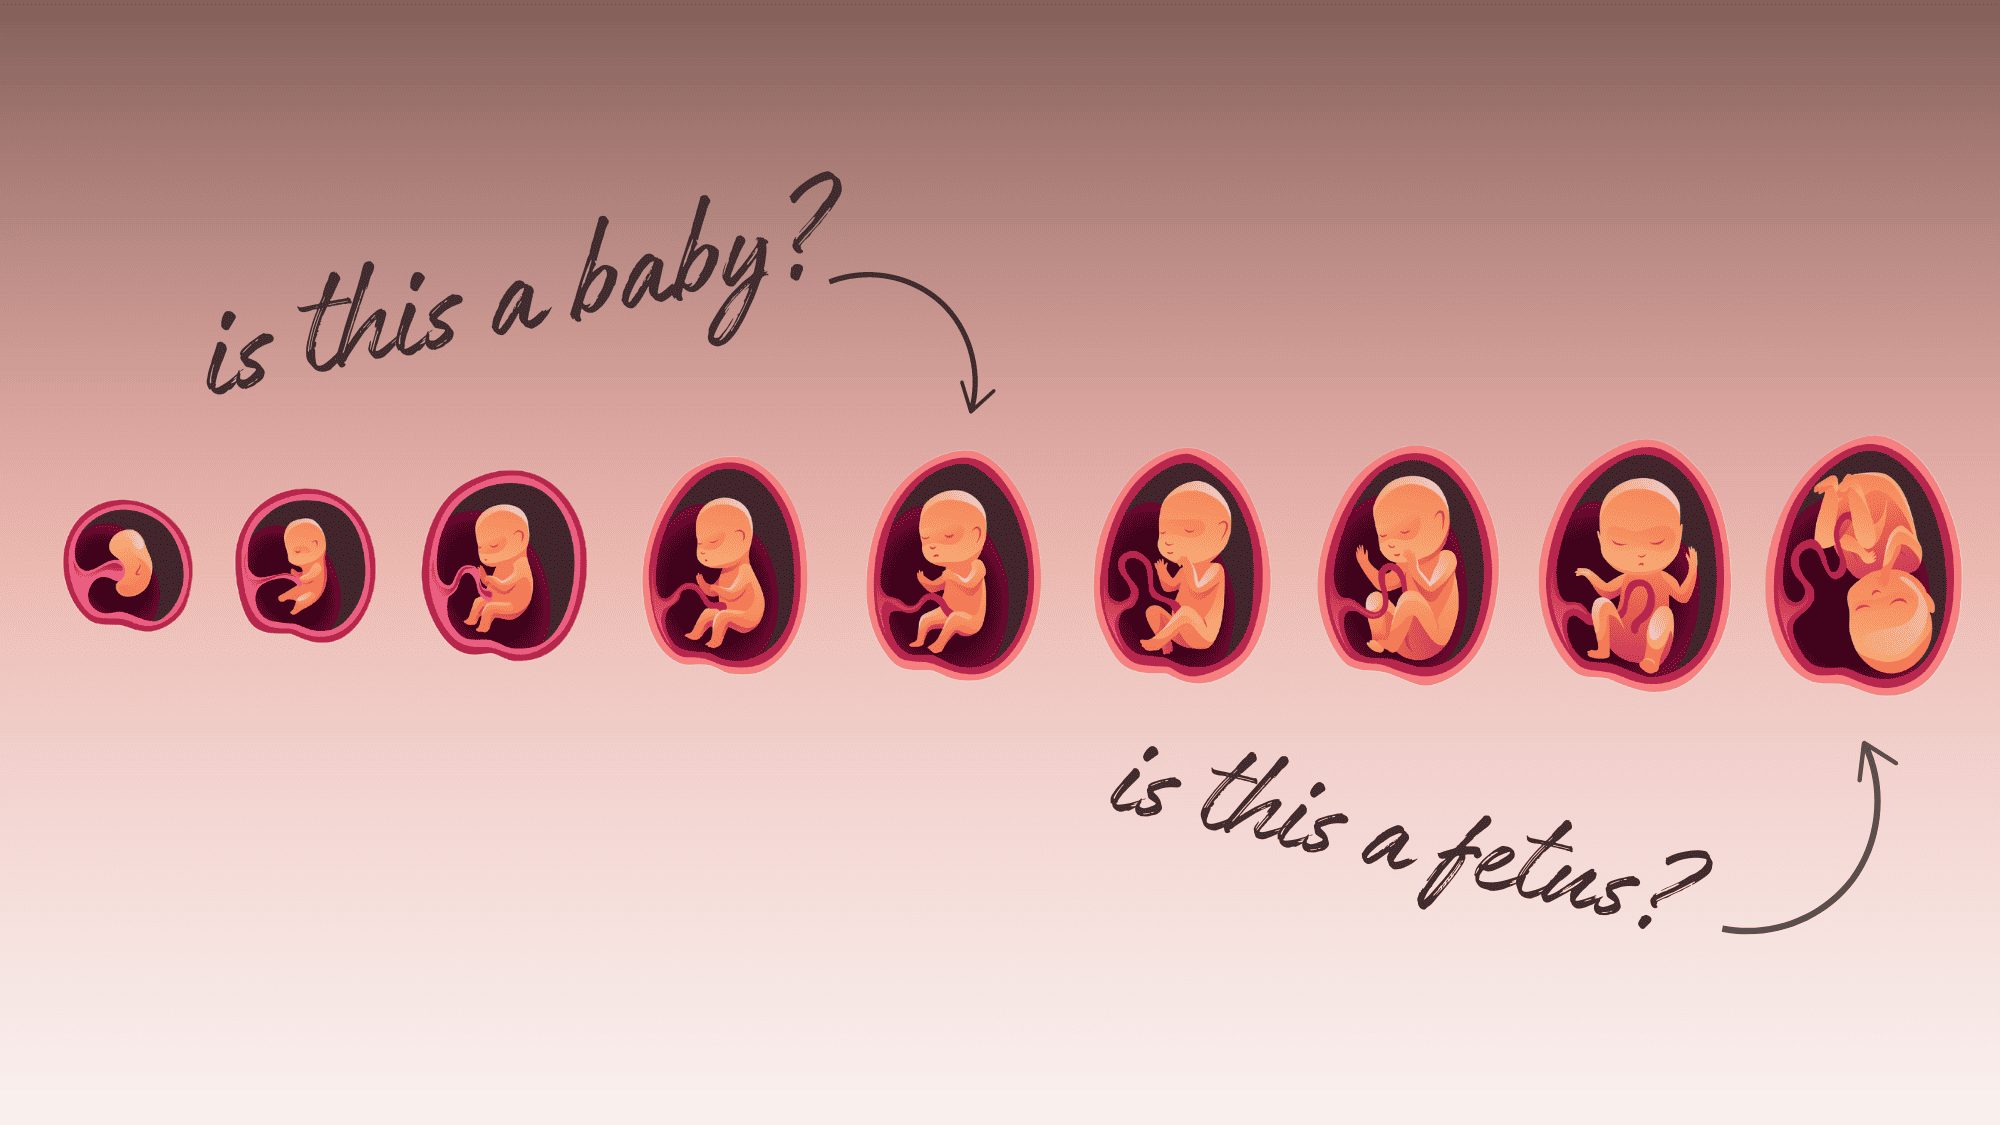 When Does a Fetus Become a Baby? - Focus on the Family